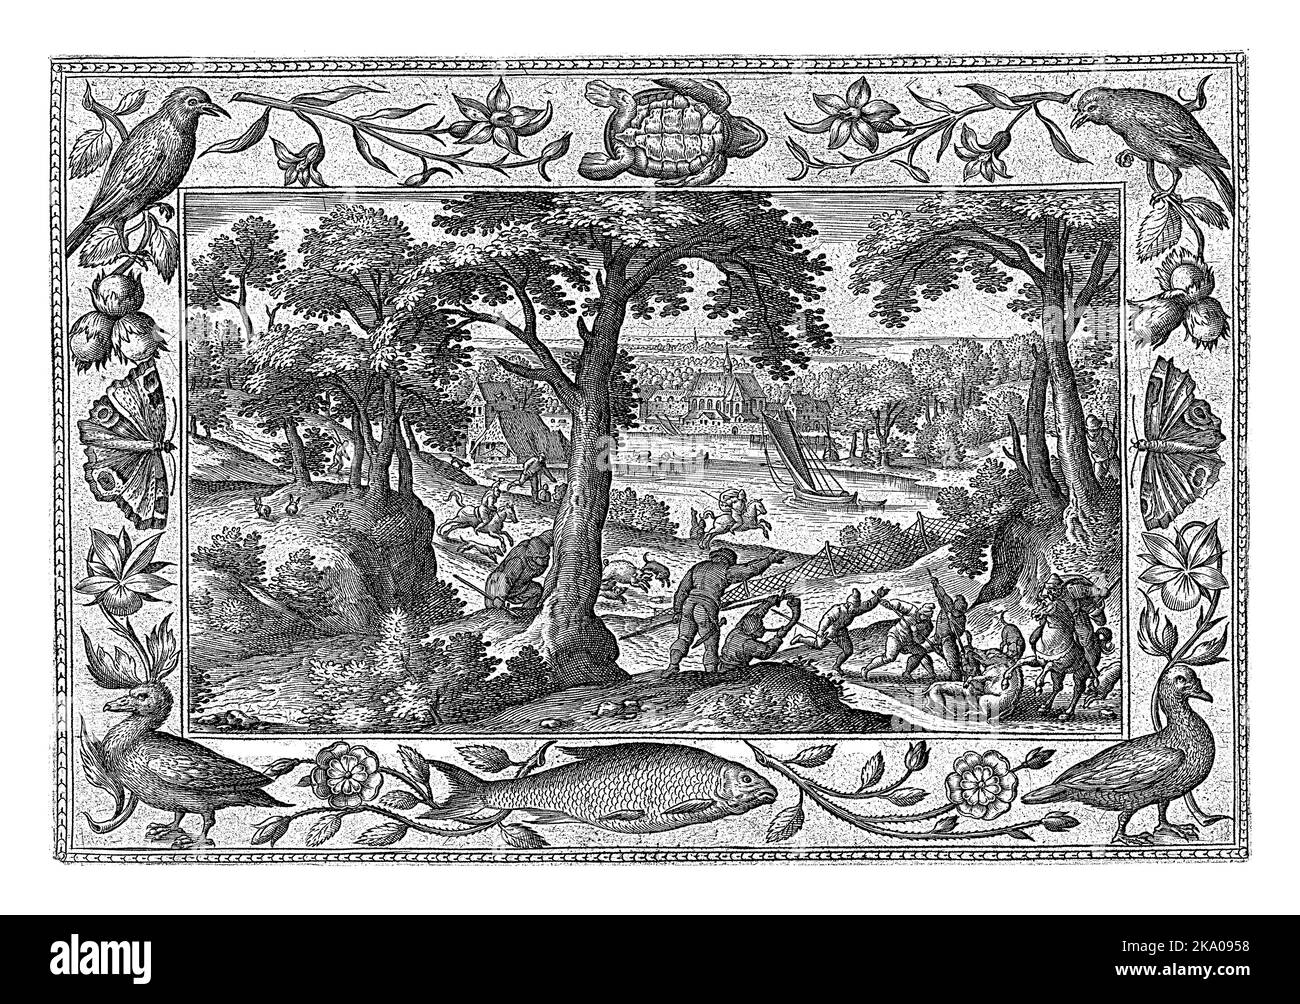 Forest landscape with boar hunt. In the foreground, a wild boar is attacked by dogs and stabbed by hunters. The print has an ornamental frame with flo Stock Photo